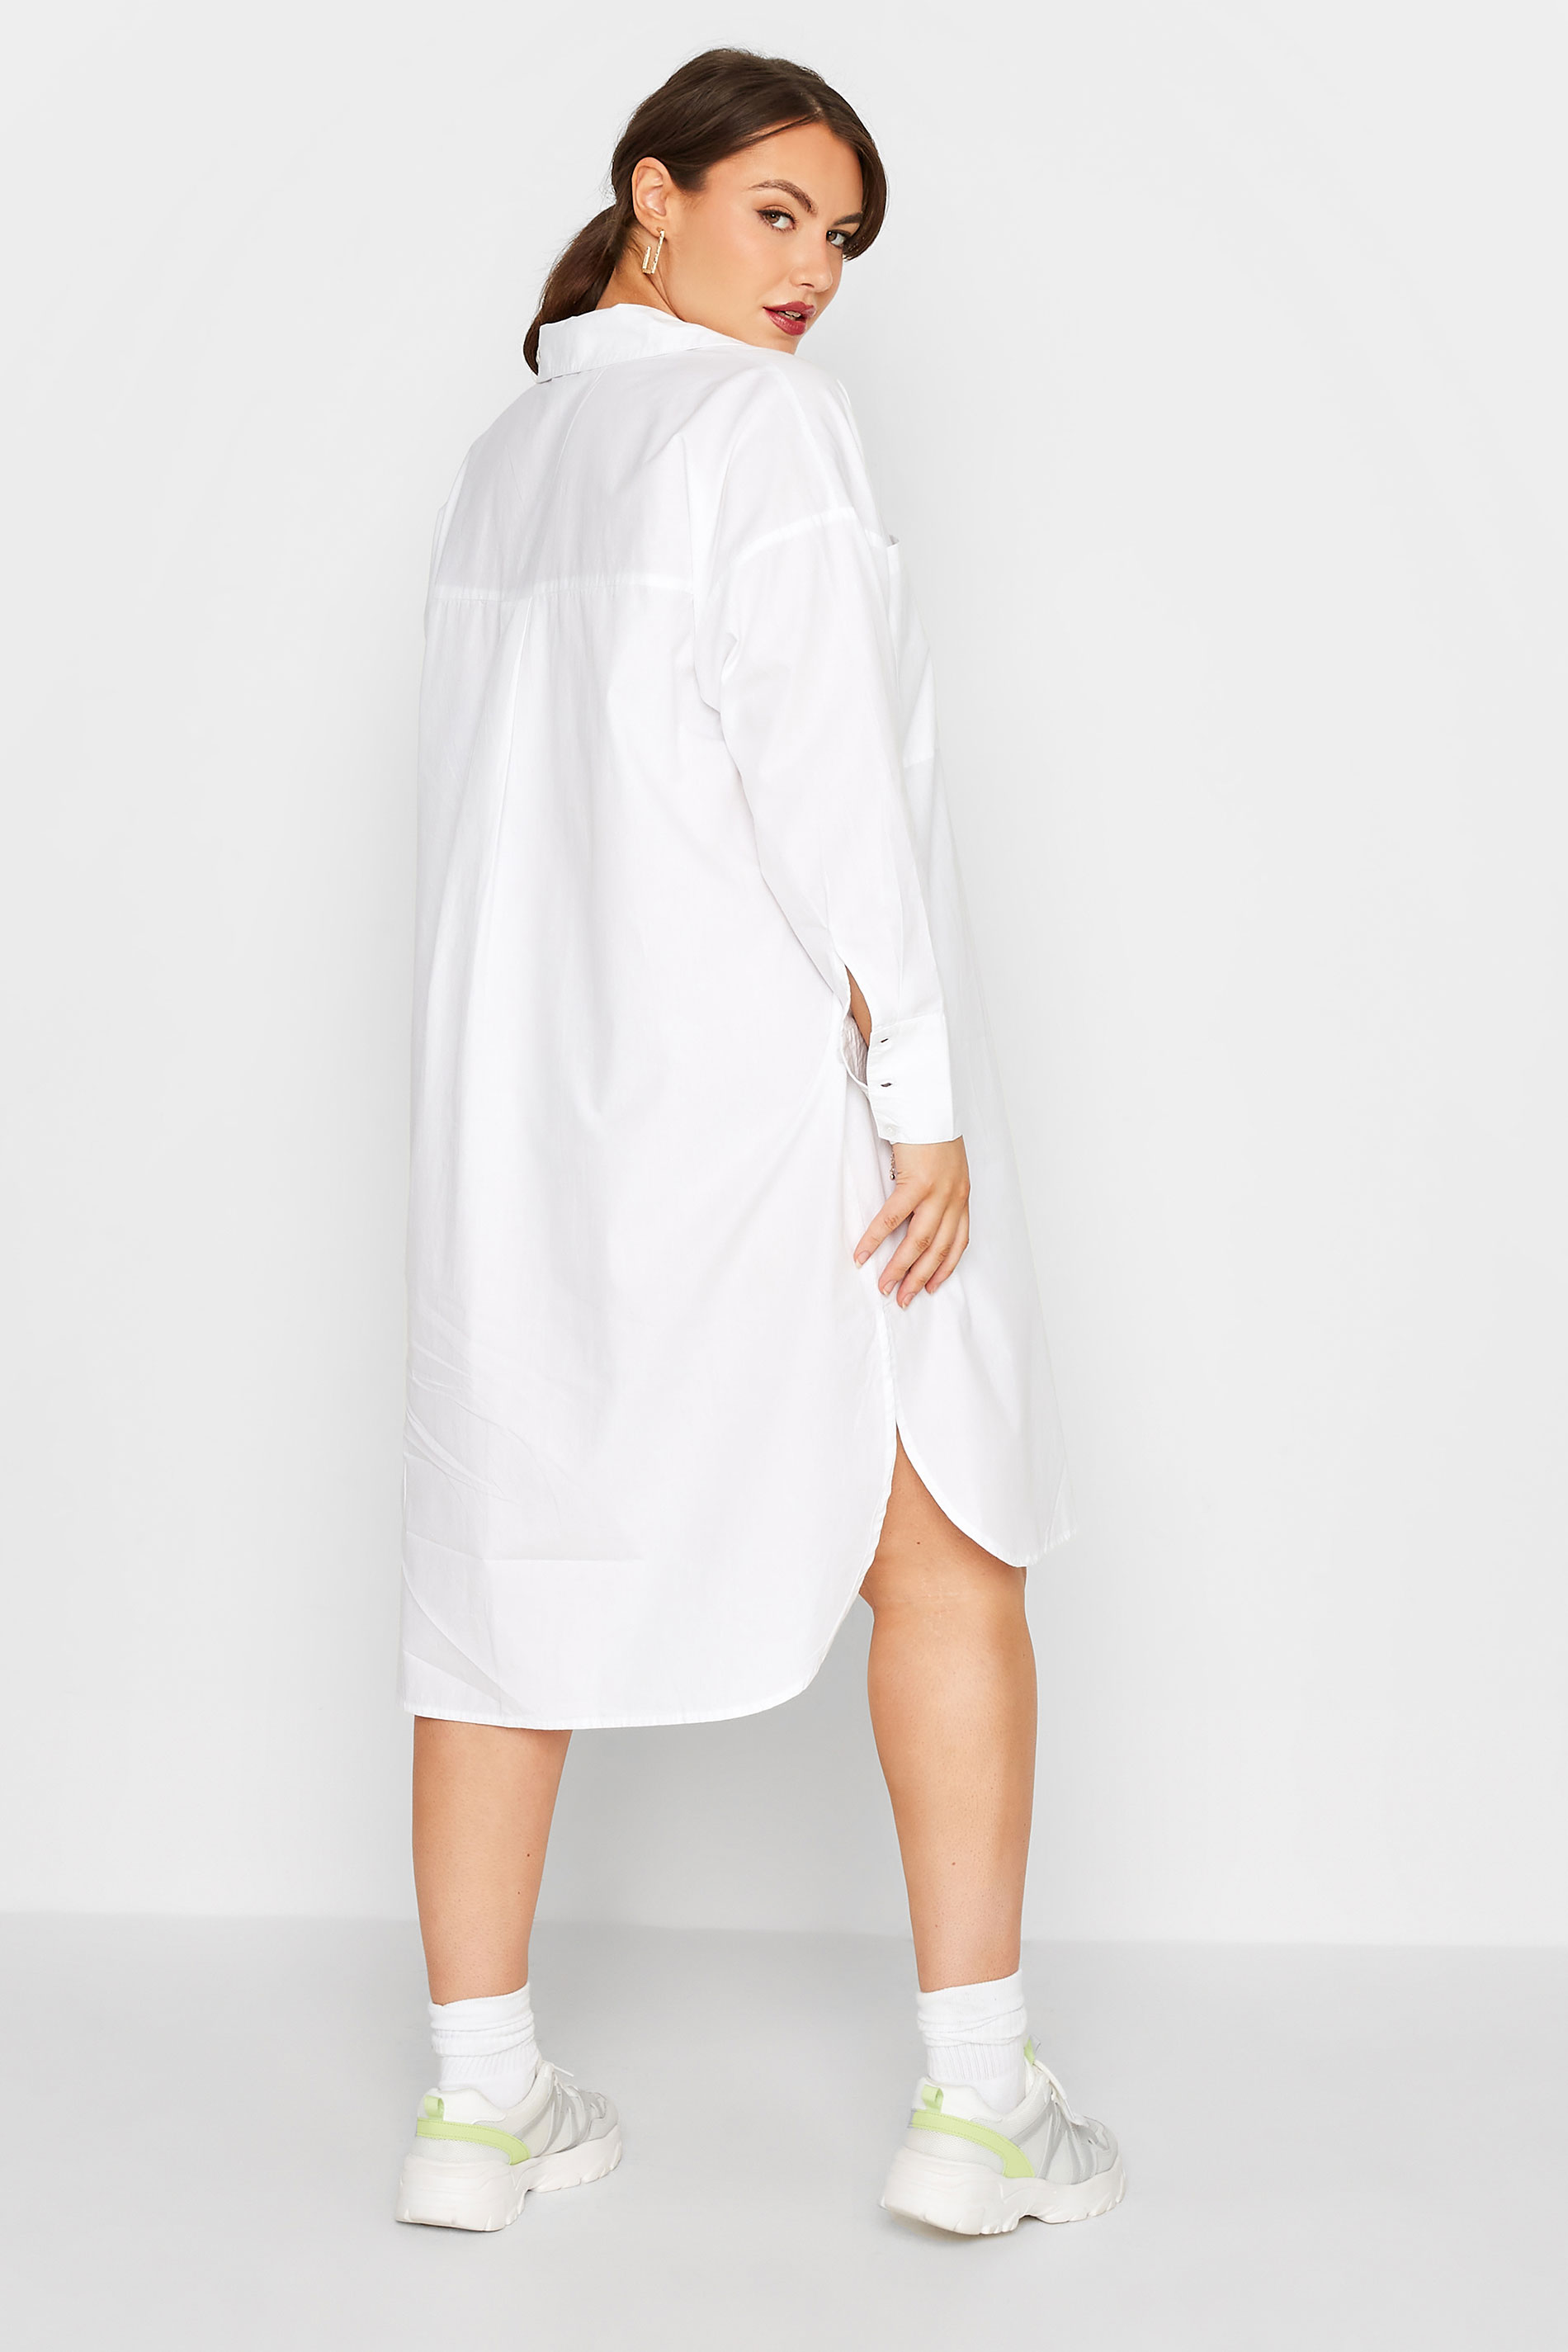 LIMITED COLLECTION Plus Size White Midi Shirt Dress | Yours Clothing 3